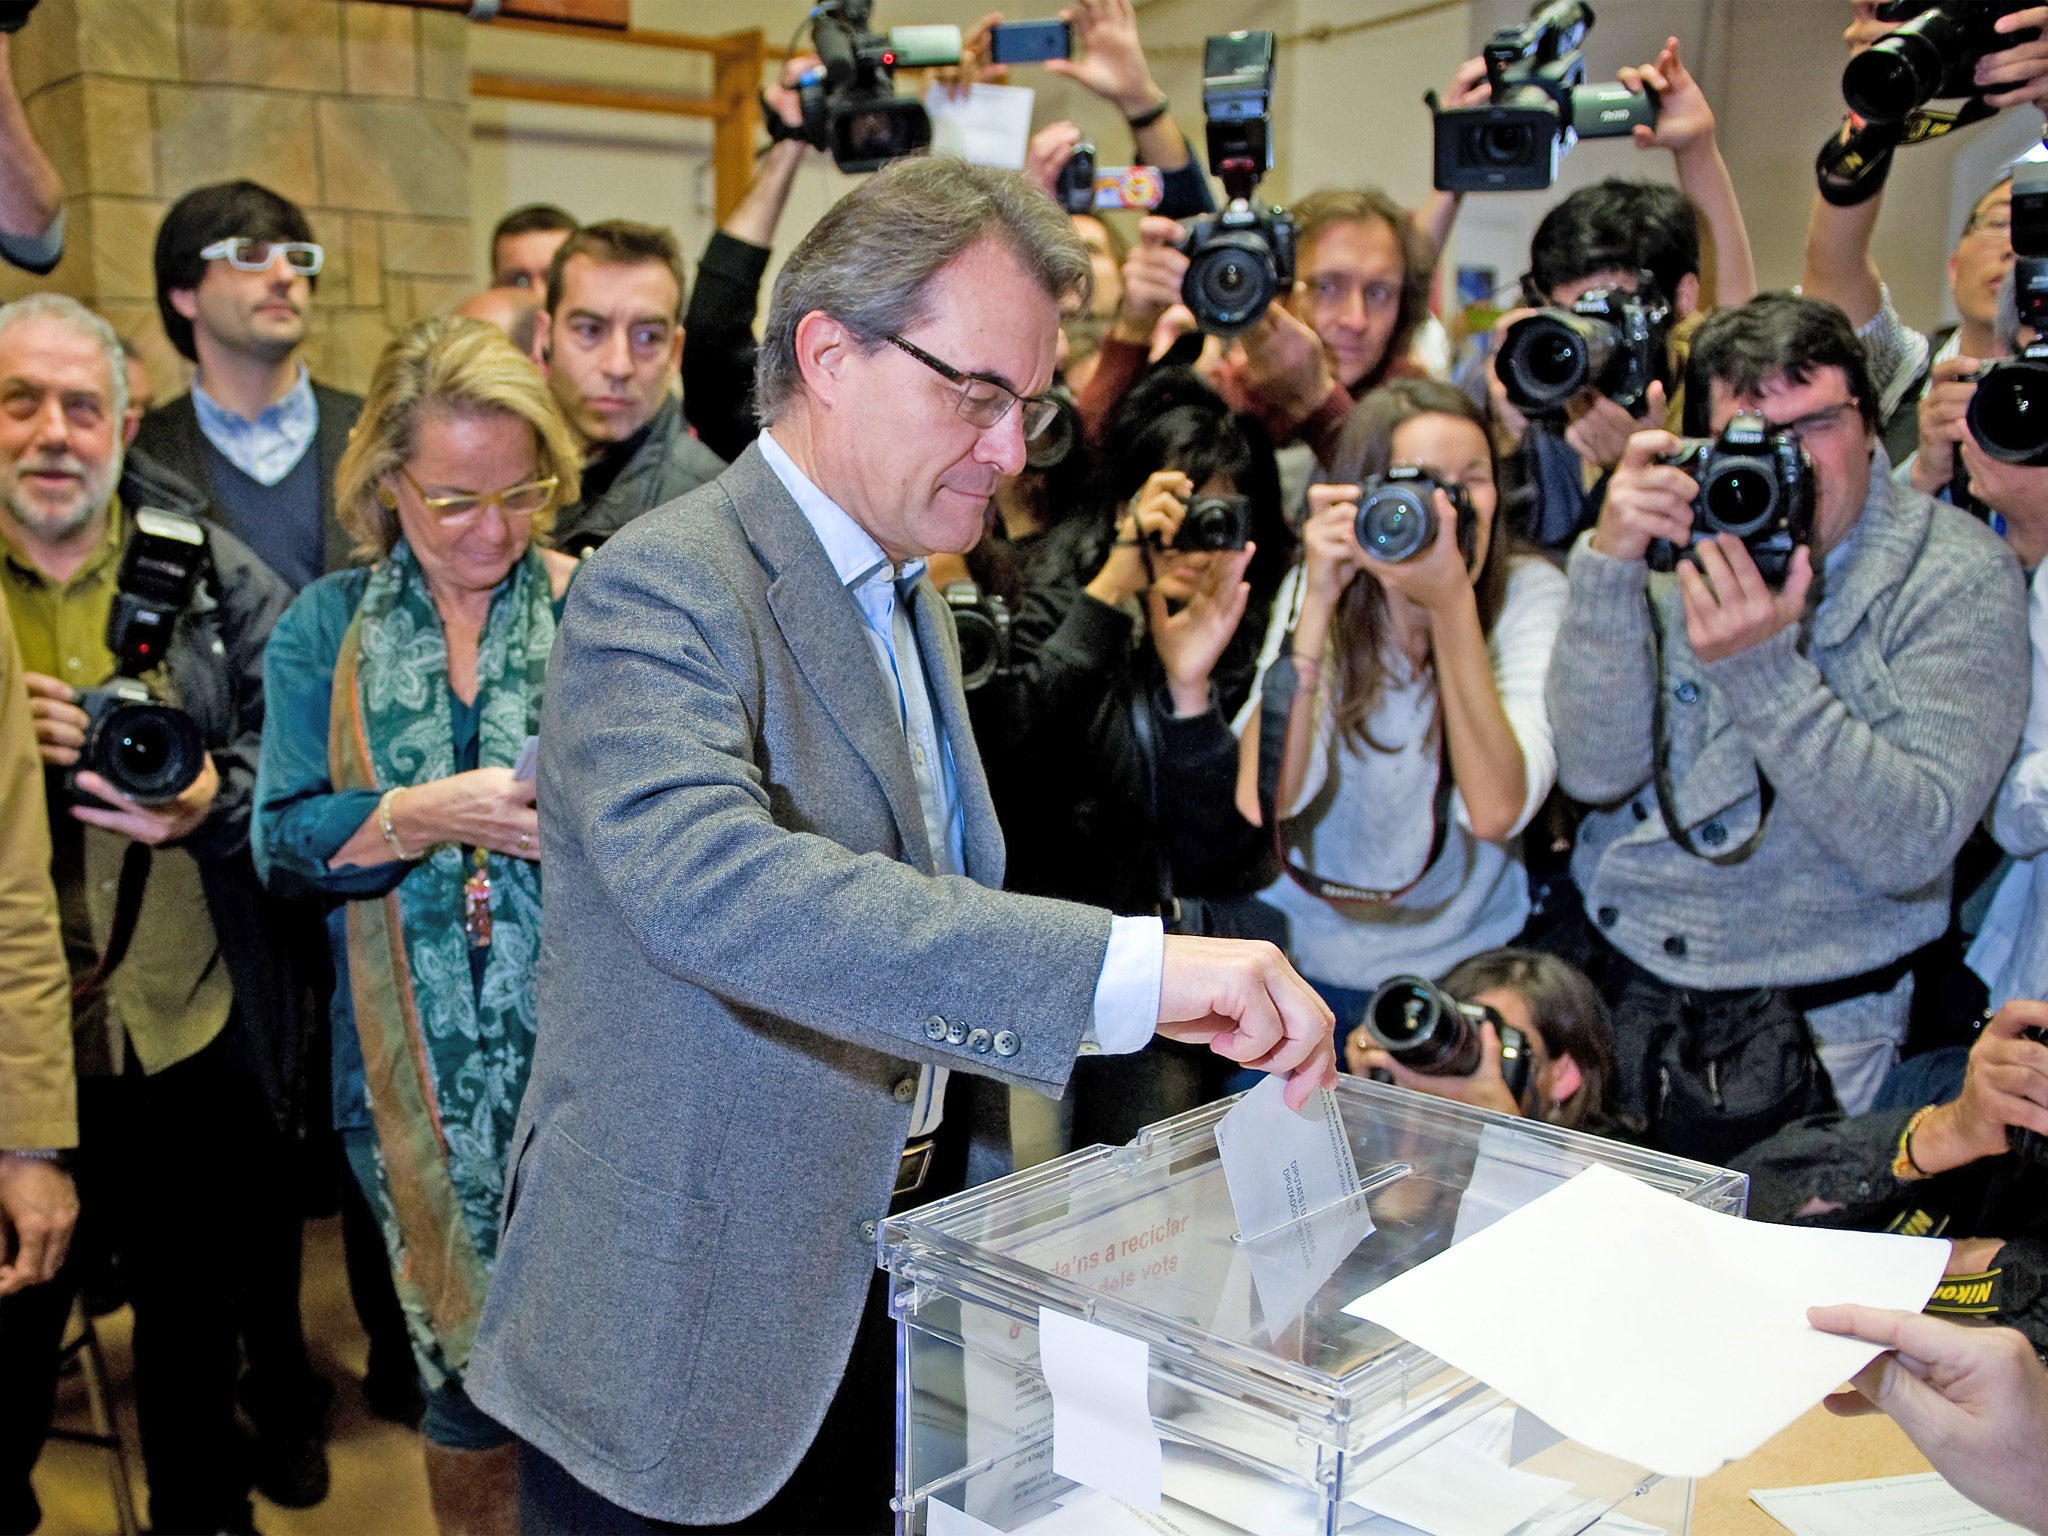 President of Catalonia and of the Pro-Independent Catalan Convergence and Unity party (CIU) Artur Mas, casts his ballot for regional elections held in Catalunyaon